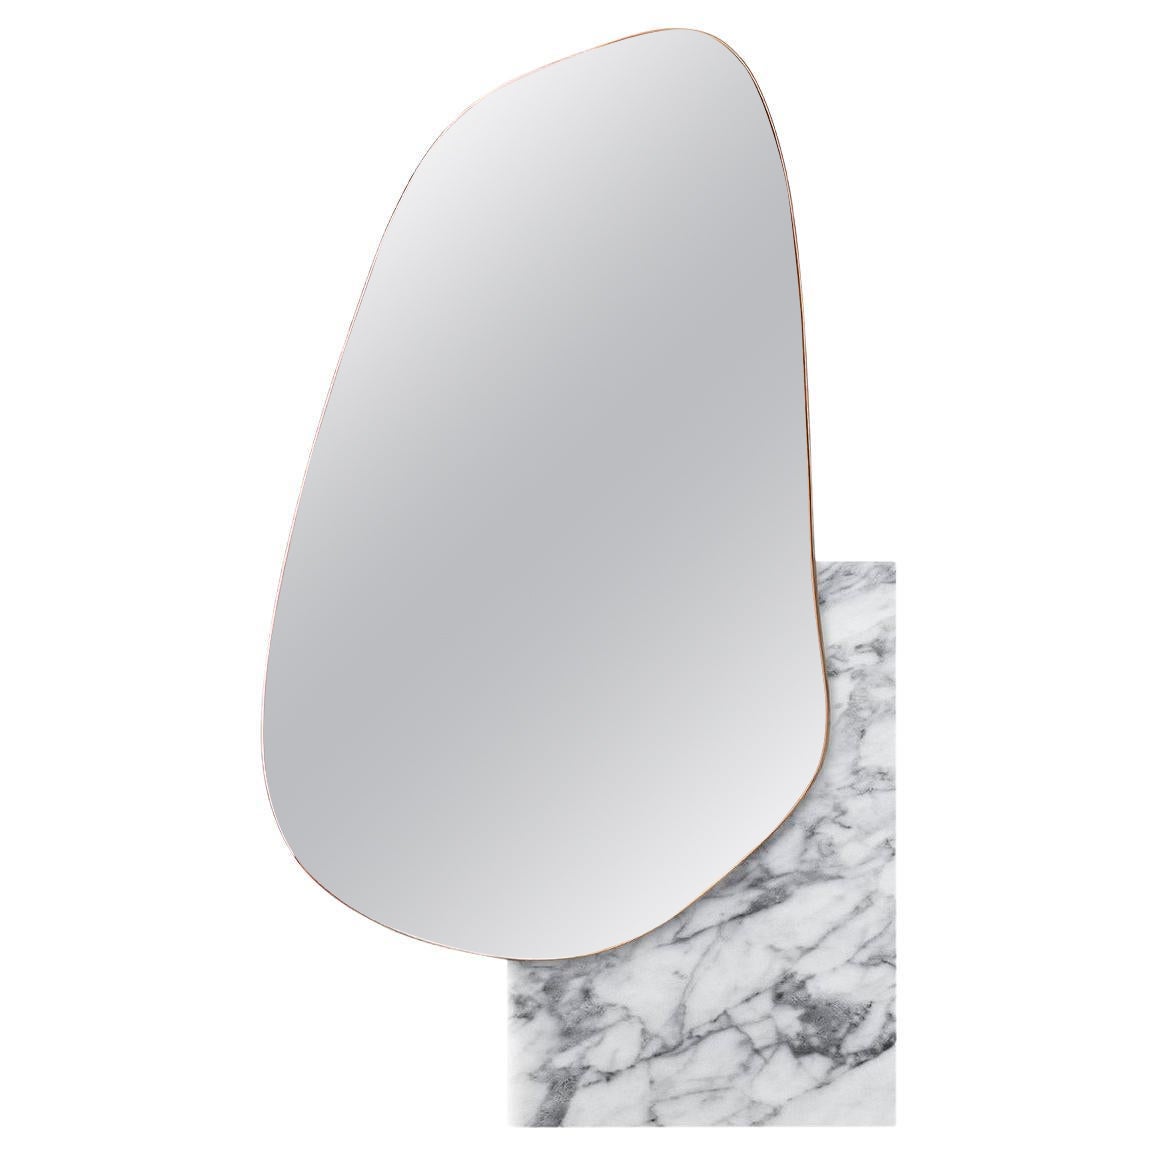 Contemporary Wall Mirror 'Lake 3' by Noom, White Marble and Copper Tint For Sale